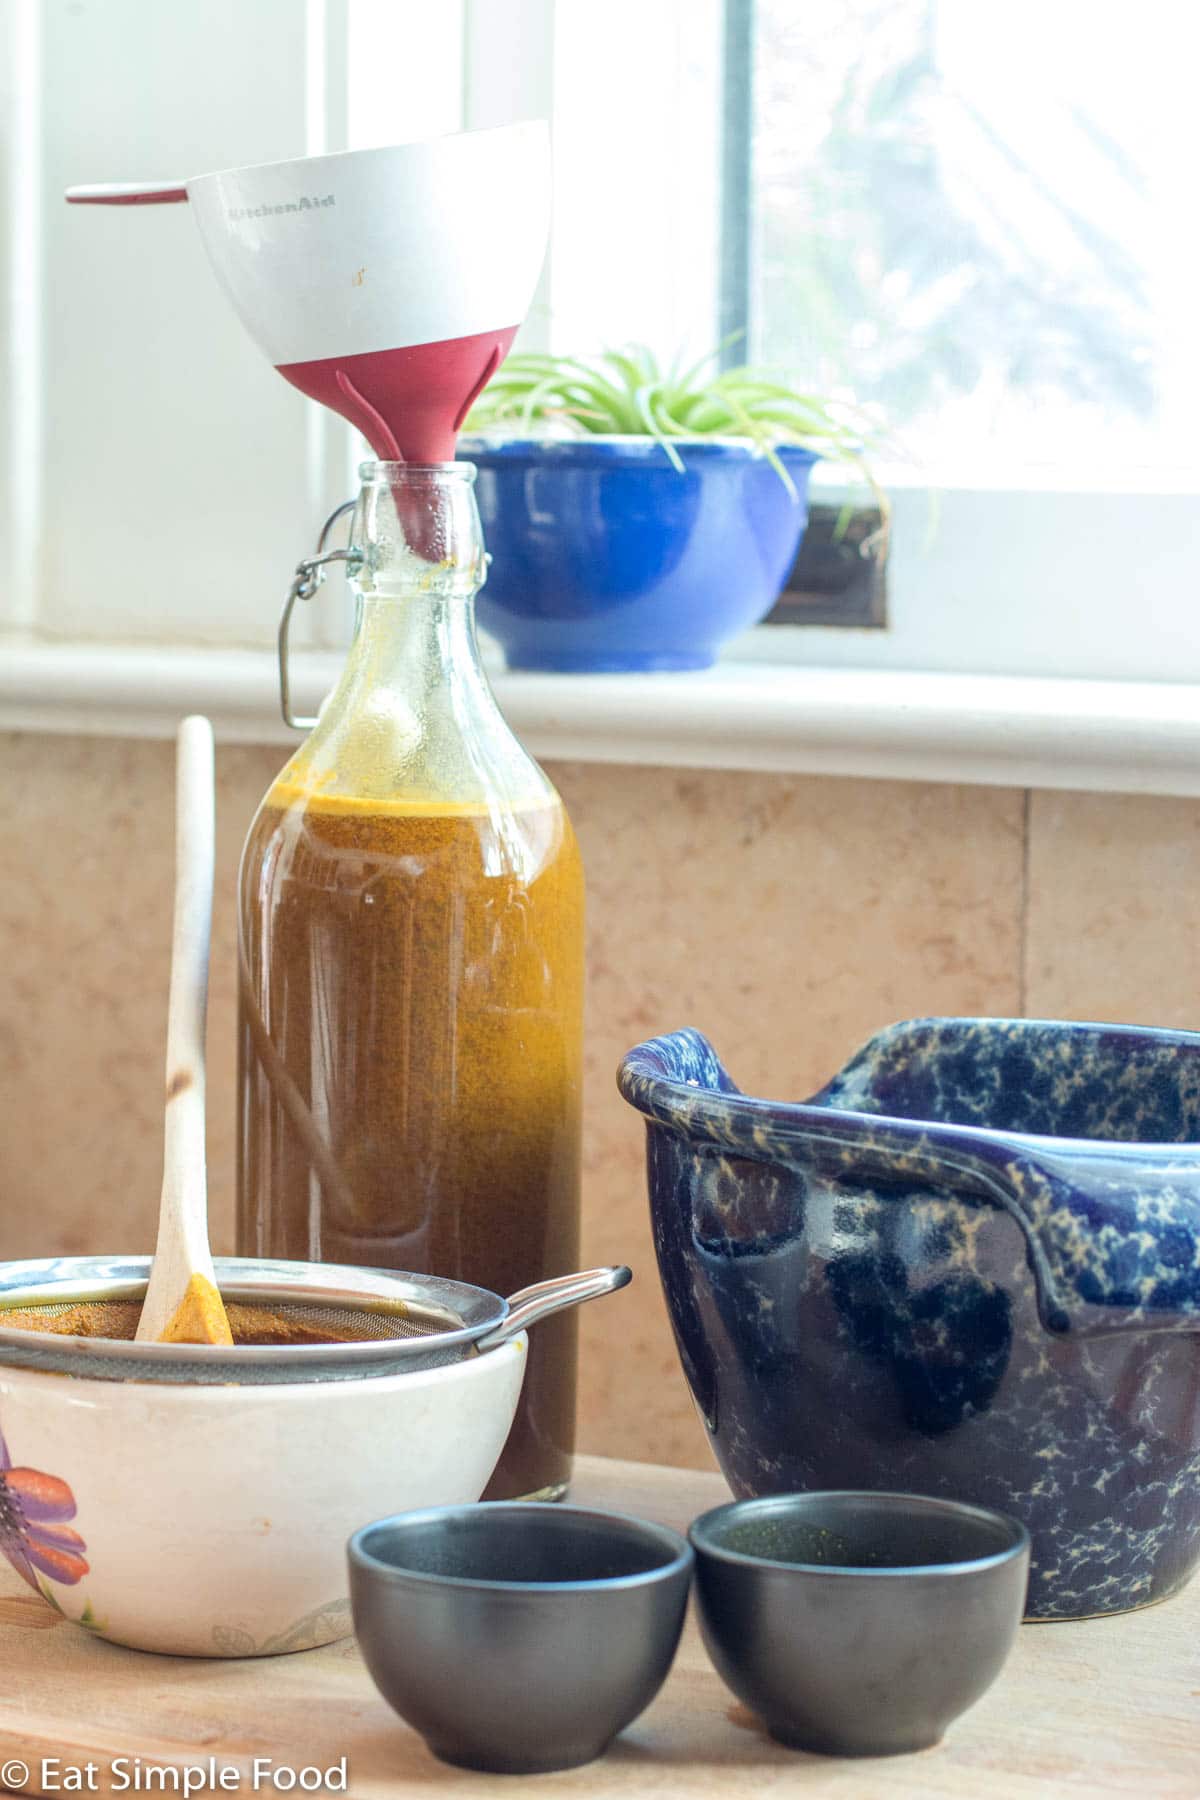 A liter size bottle with brown jamu liquid in it with a funnel on the top. White bowl in the front. Blue bowl on the side and two very small black drinking shot glasses in the front.